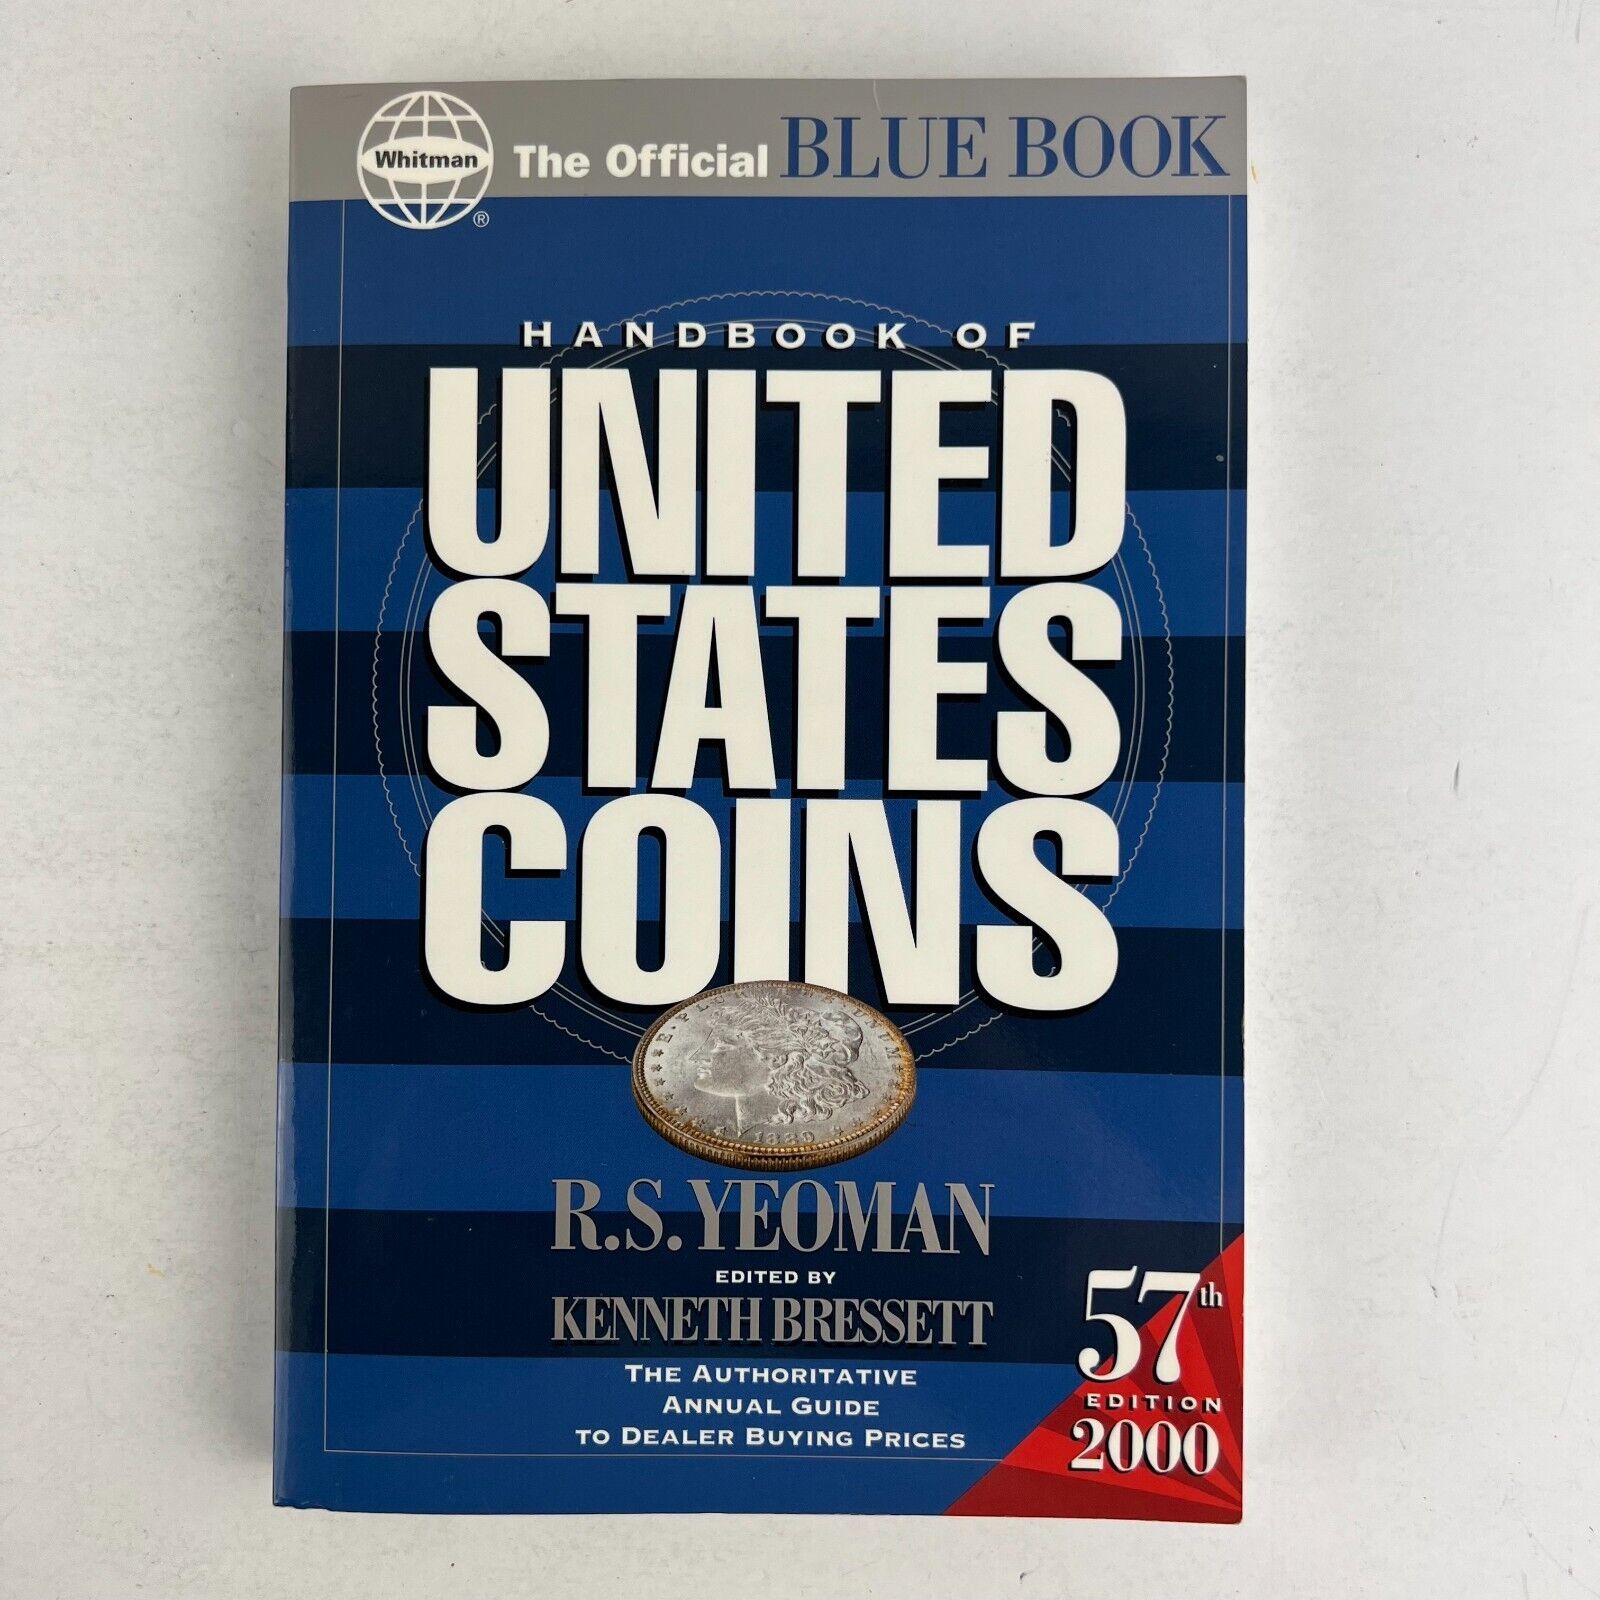 Primary image for Whitman Guidebook Of United States Coin Blue Book R.S. Yeoman 57th Edition